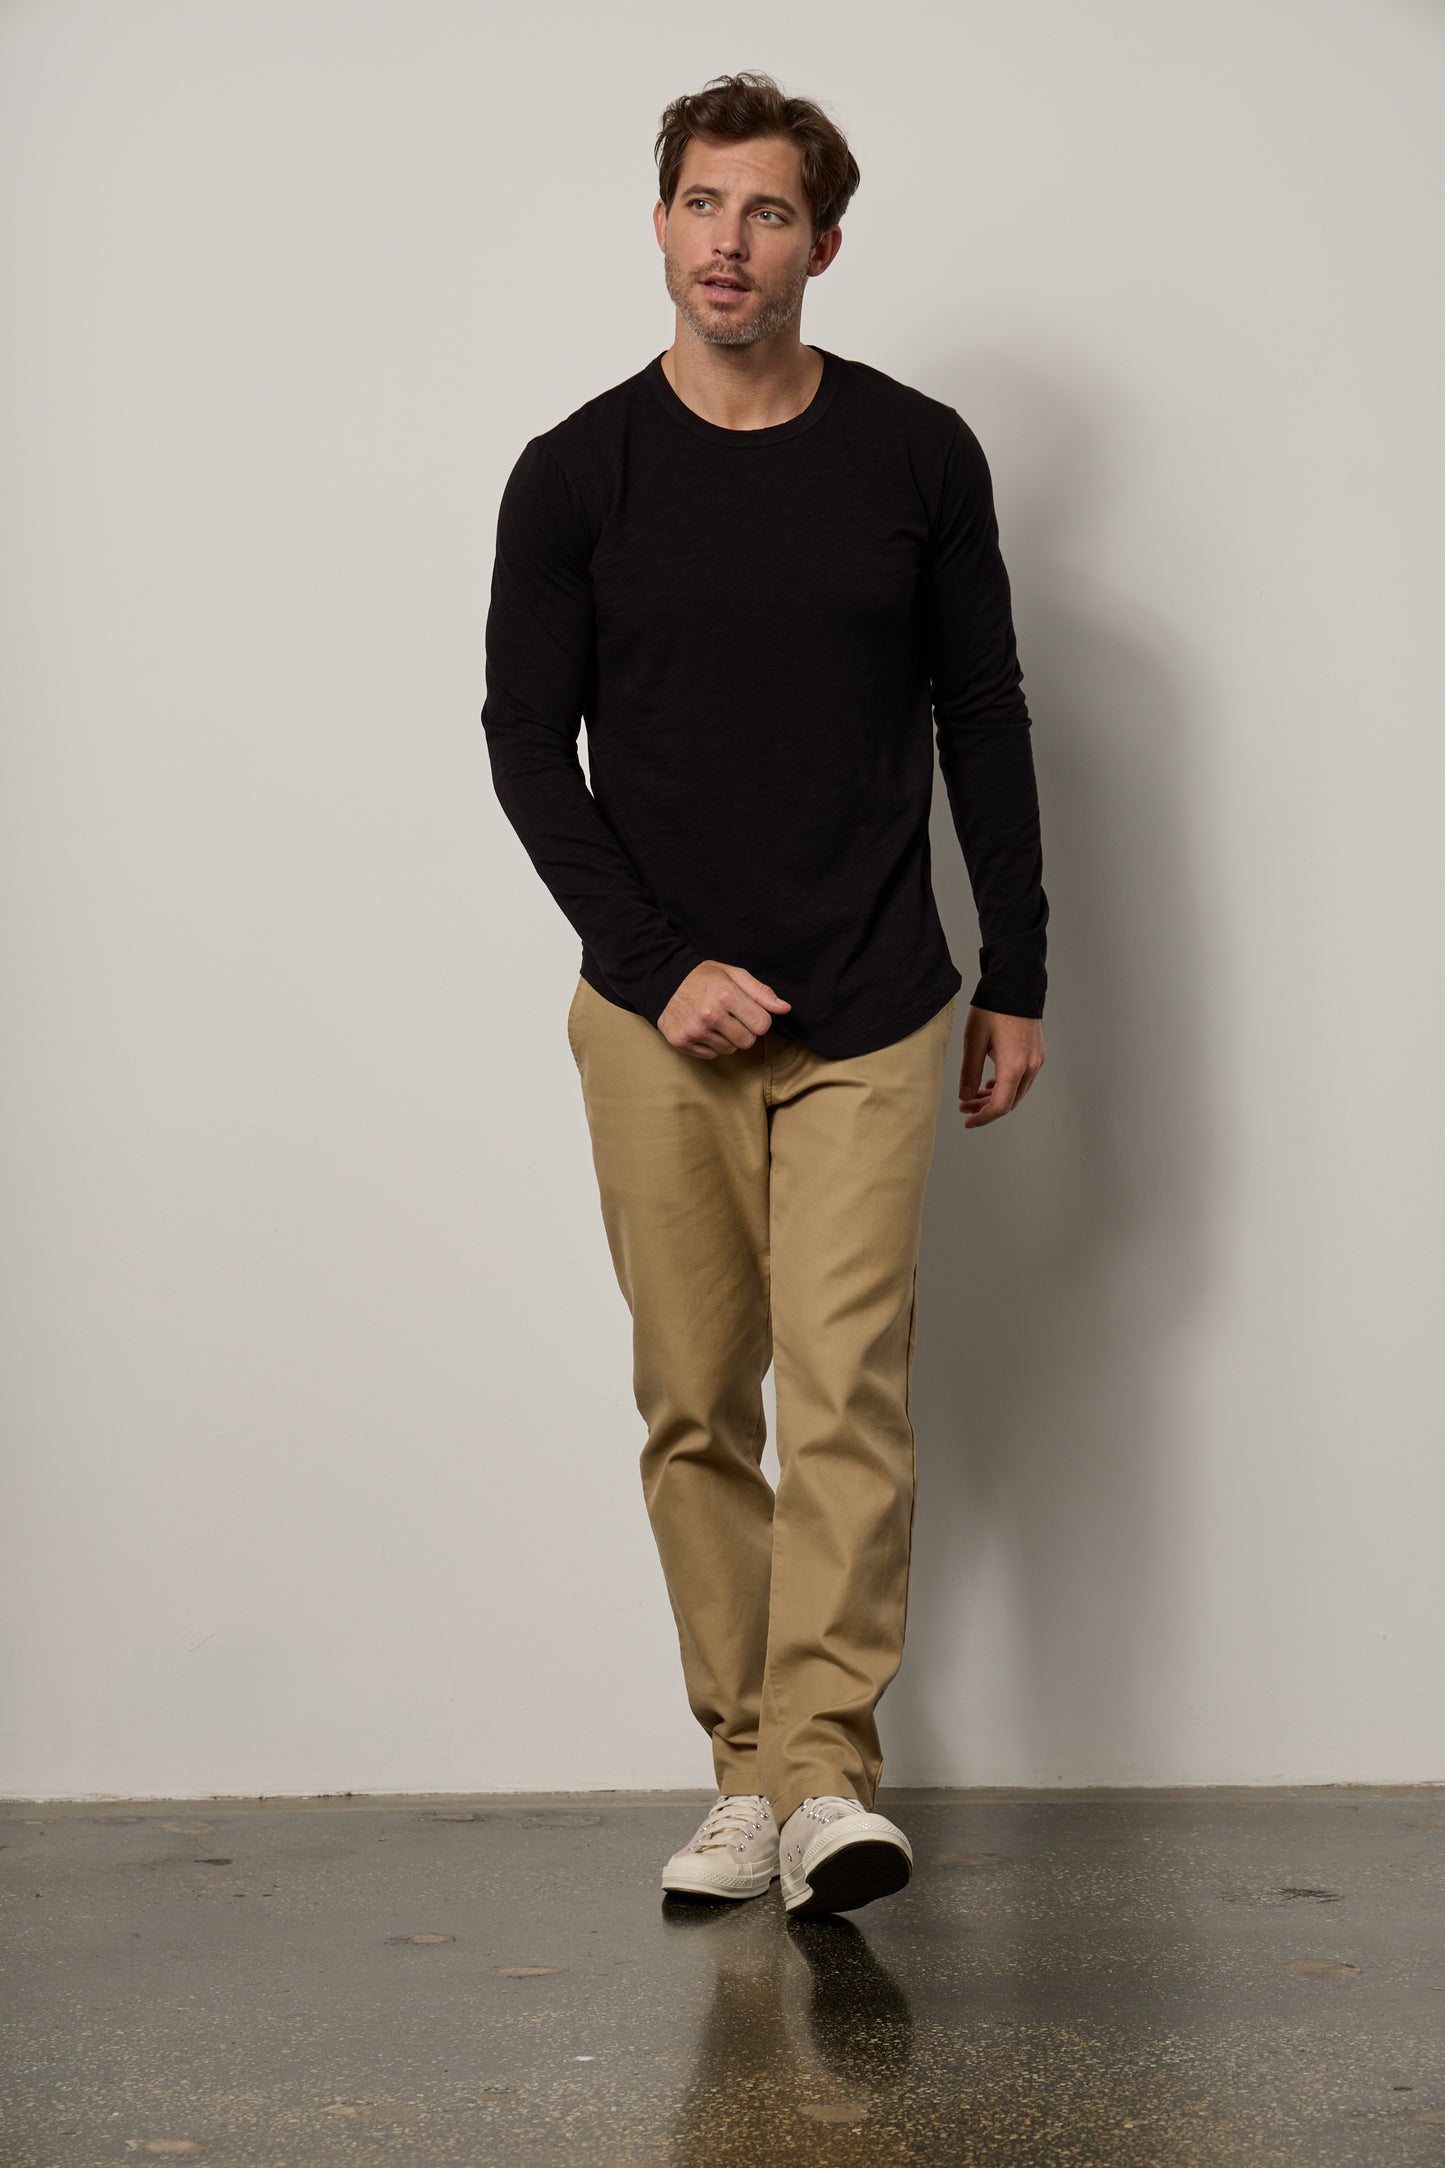 A man in a flawless fit, wearing a Velvet by Graham & Spencer KAI CREW NECK TEE and khaki pants.-35607579099329